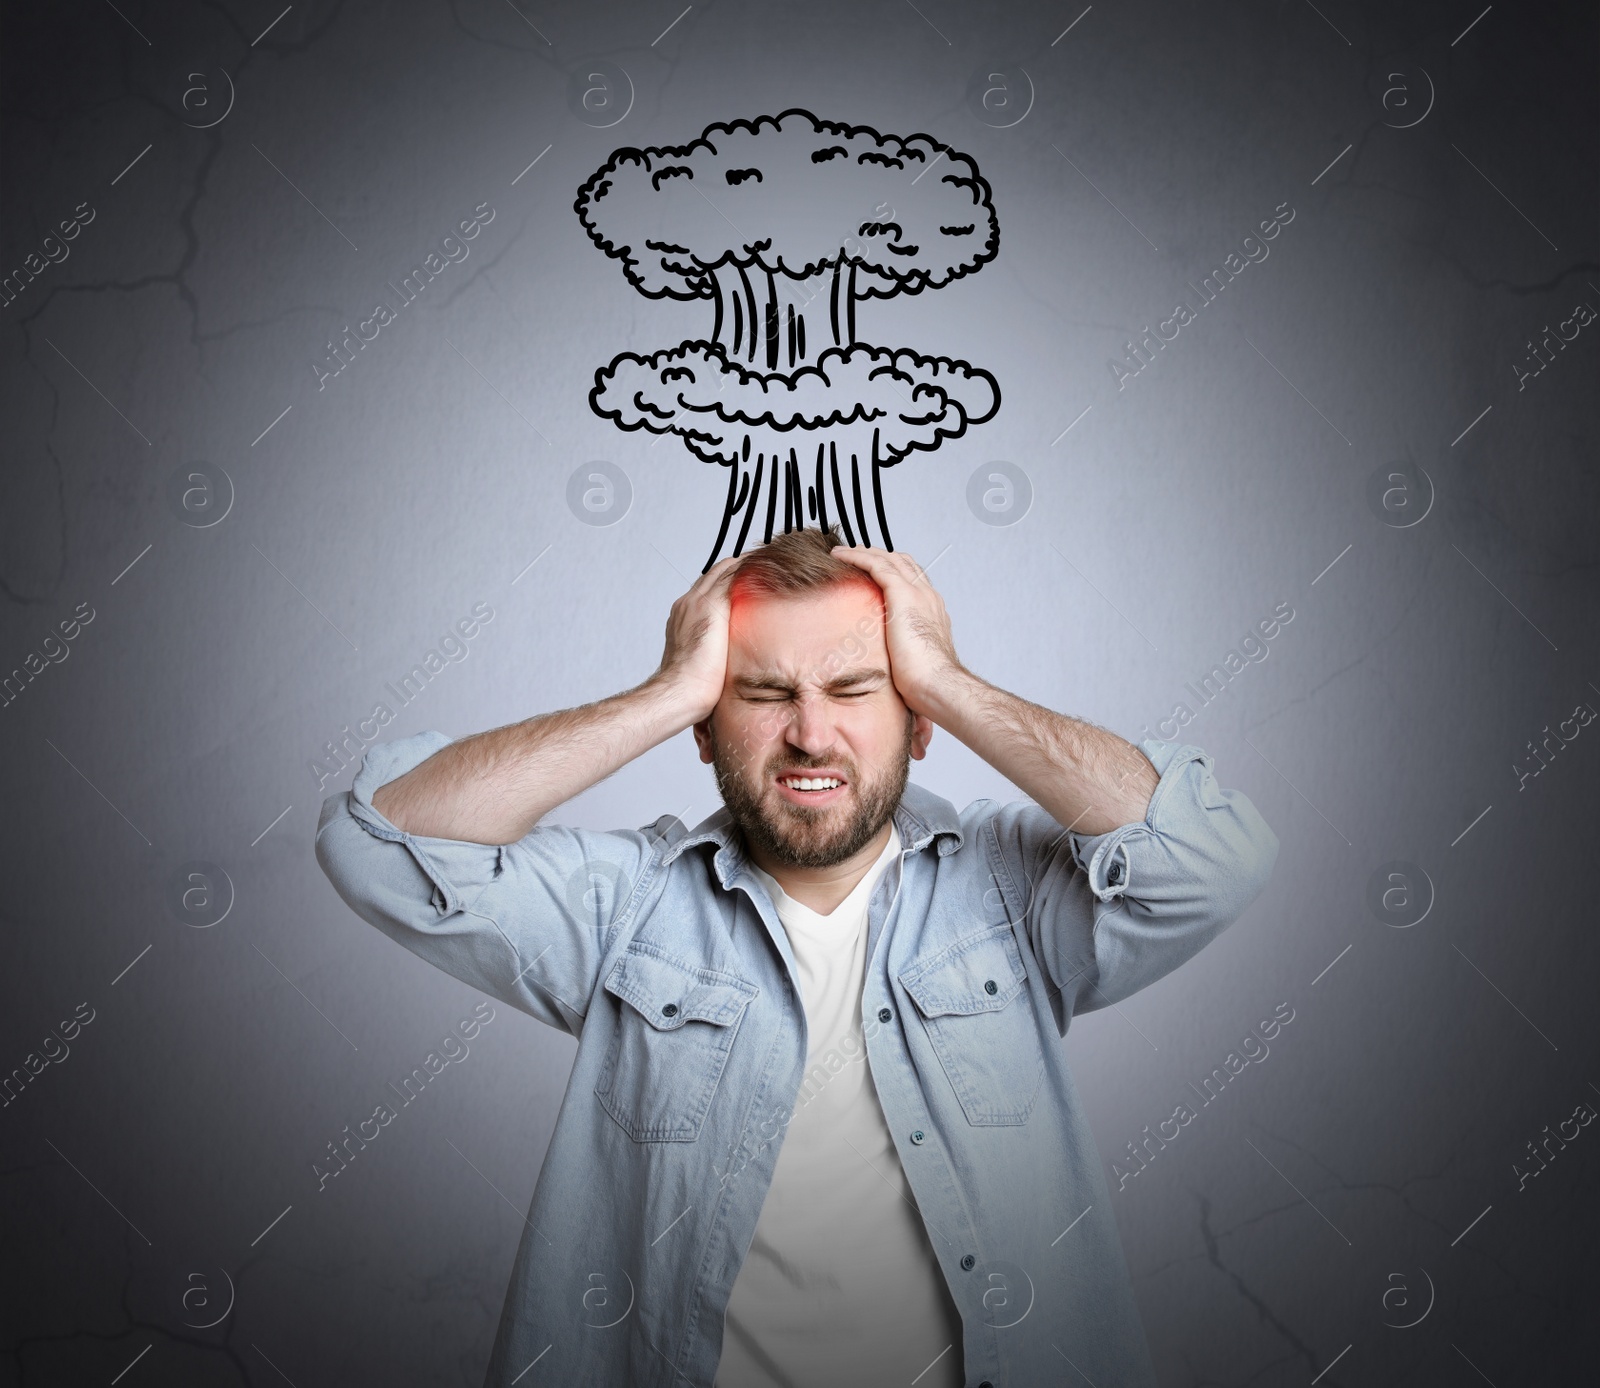 Image of Young man having headache on light grey background. Illustration of atomic explosion representing severe pain